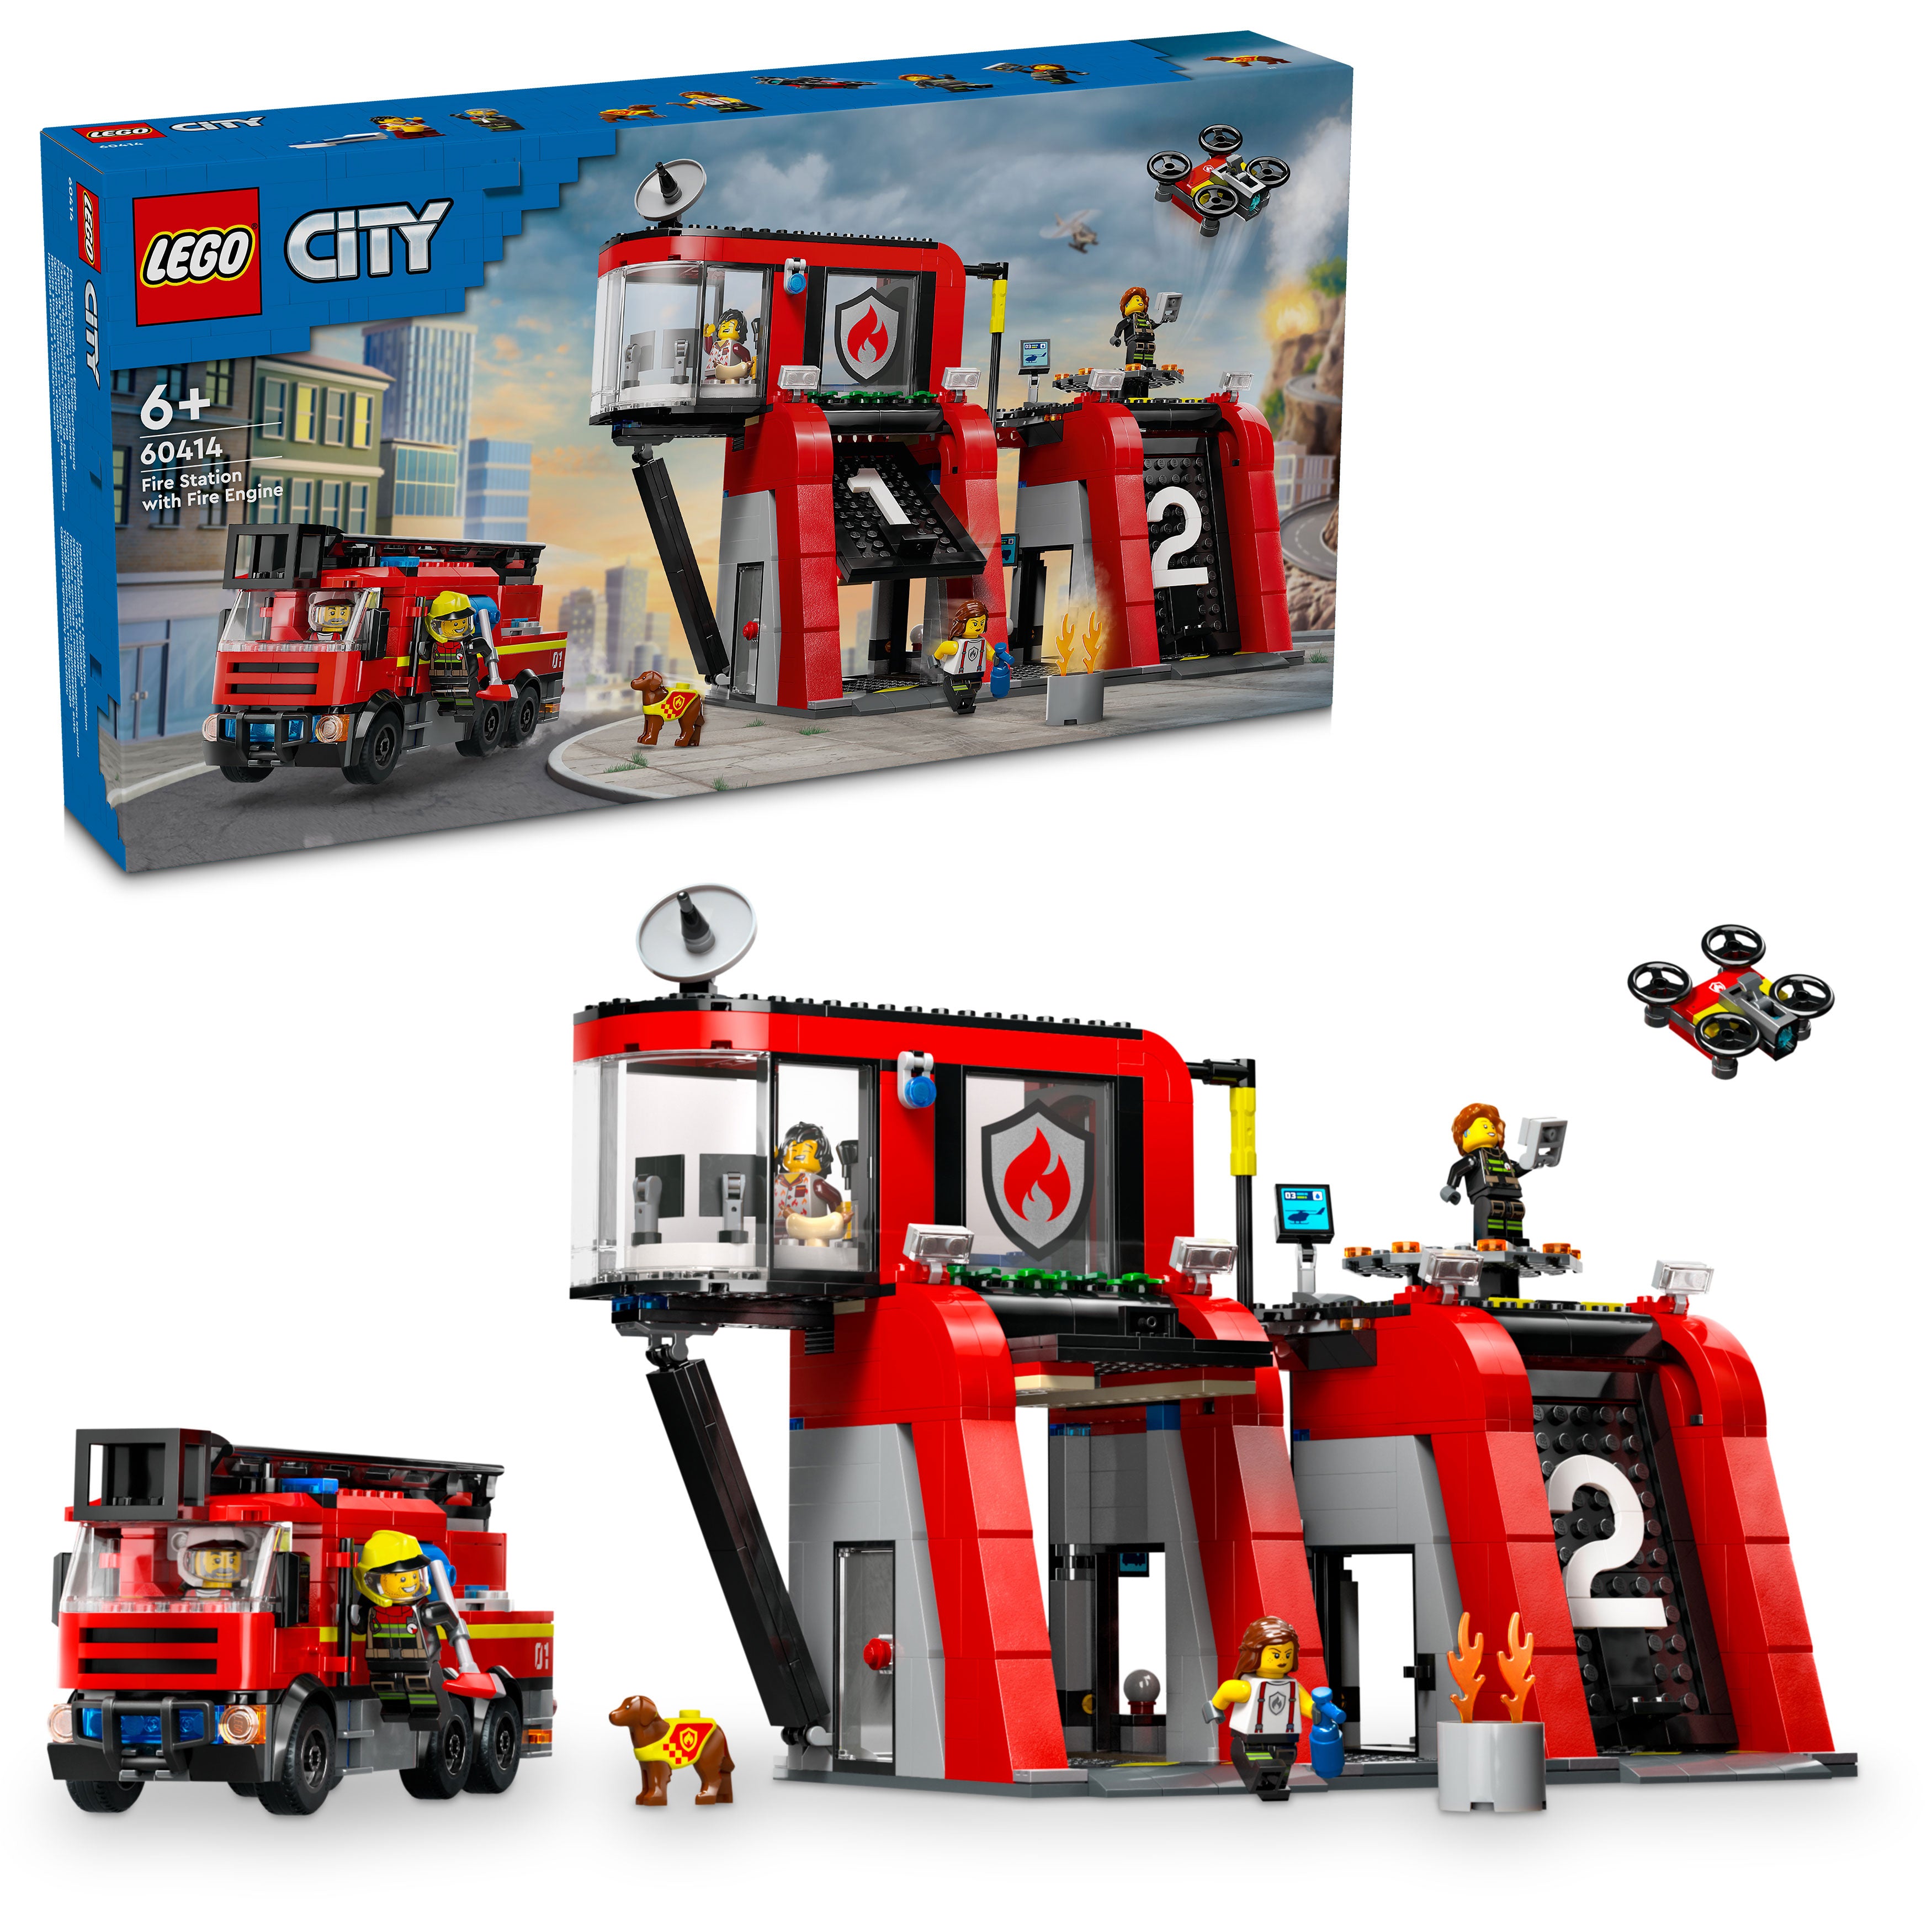 Lego 60414 Fire Station with Fire Truck